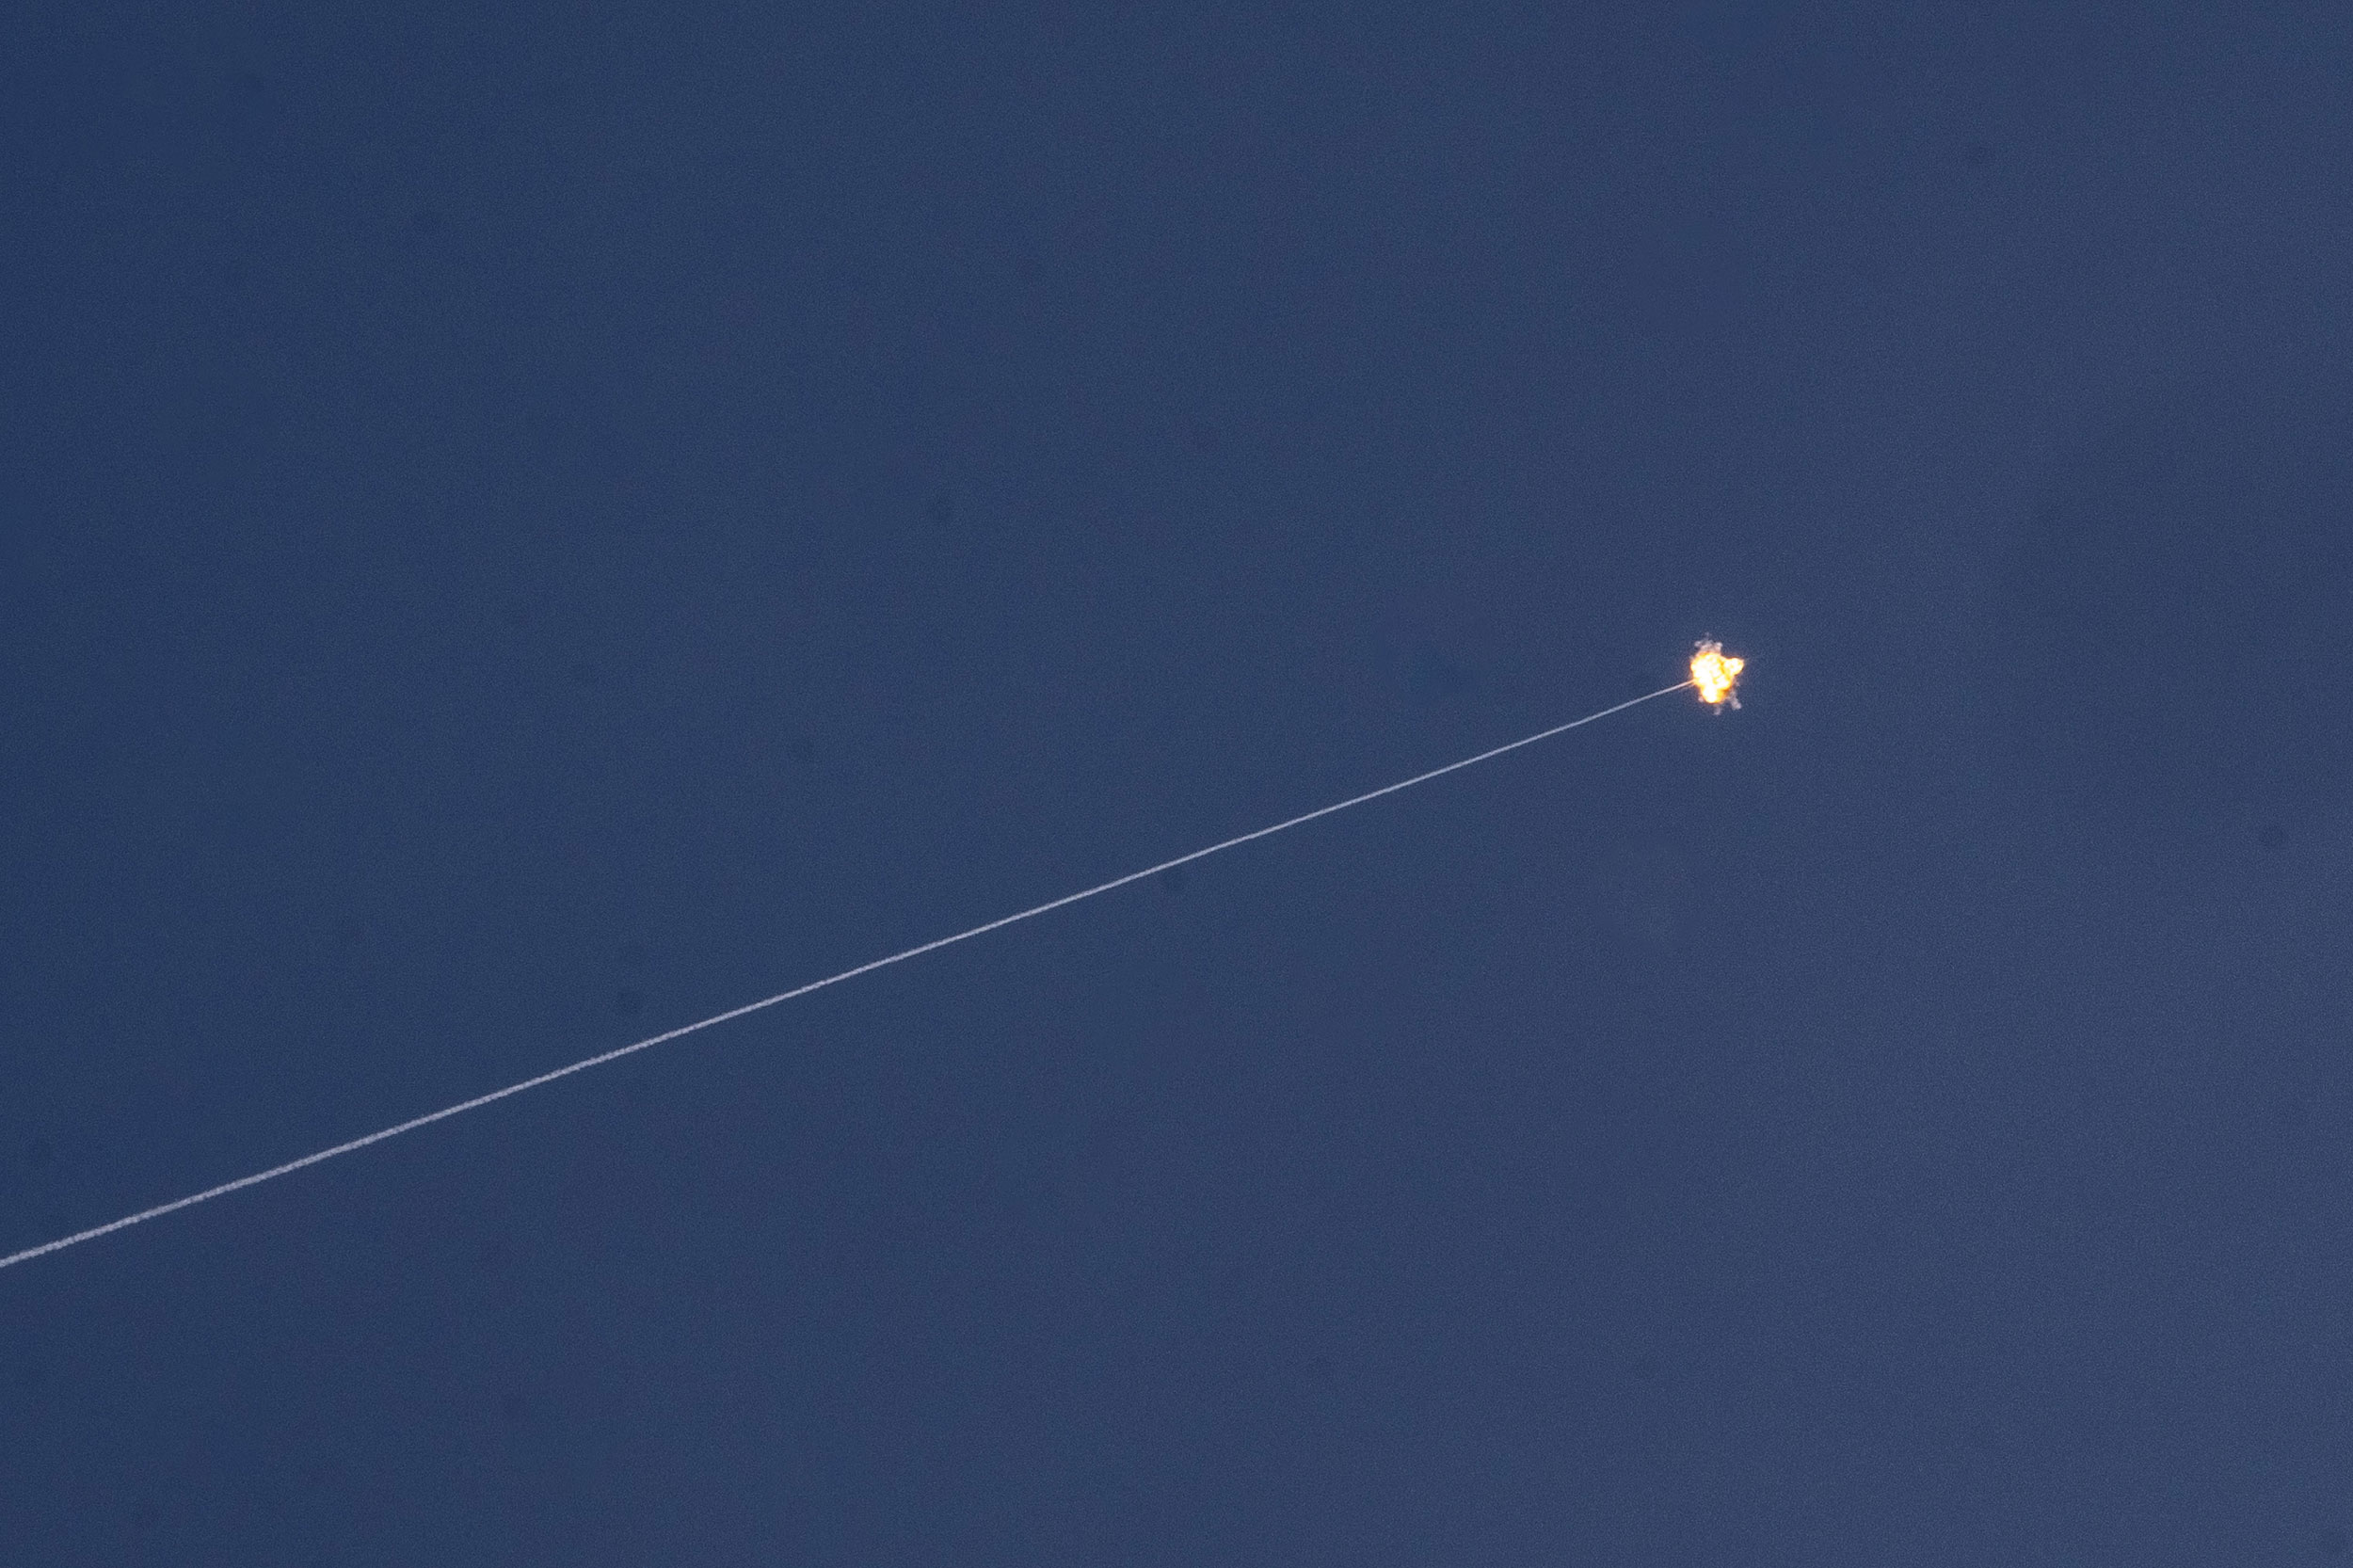 A rocket fired from Gaza is intercepted by Israel's Iron Dome defense system near Kerem Shalom, Israel, on May 7.